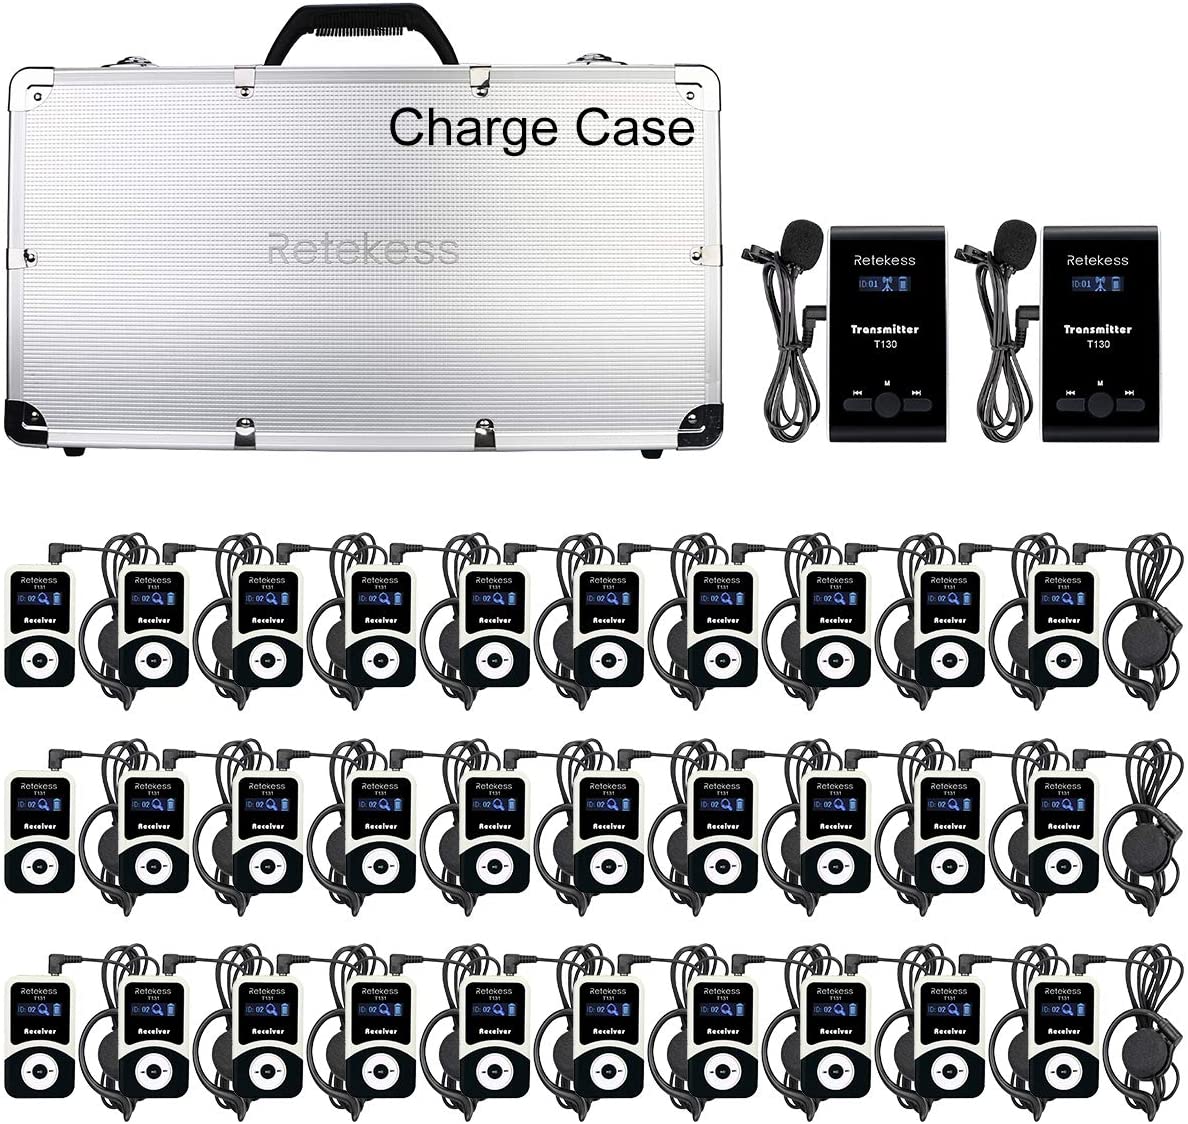 Case of 2 Transimitters 38 Receivers and 40 Slots Charging Case,Retekess TT101,Wireless Tour Guide System,256ft,One-Click Pairing,Audio Translation System for Church,Conference,School 